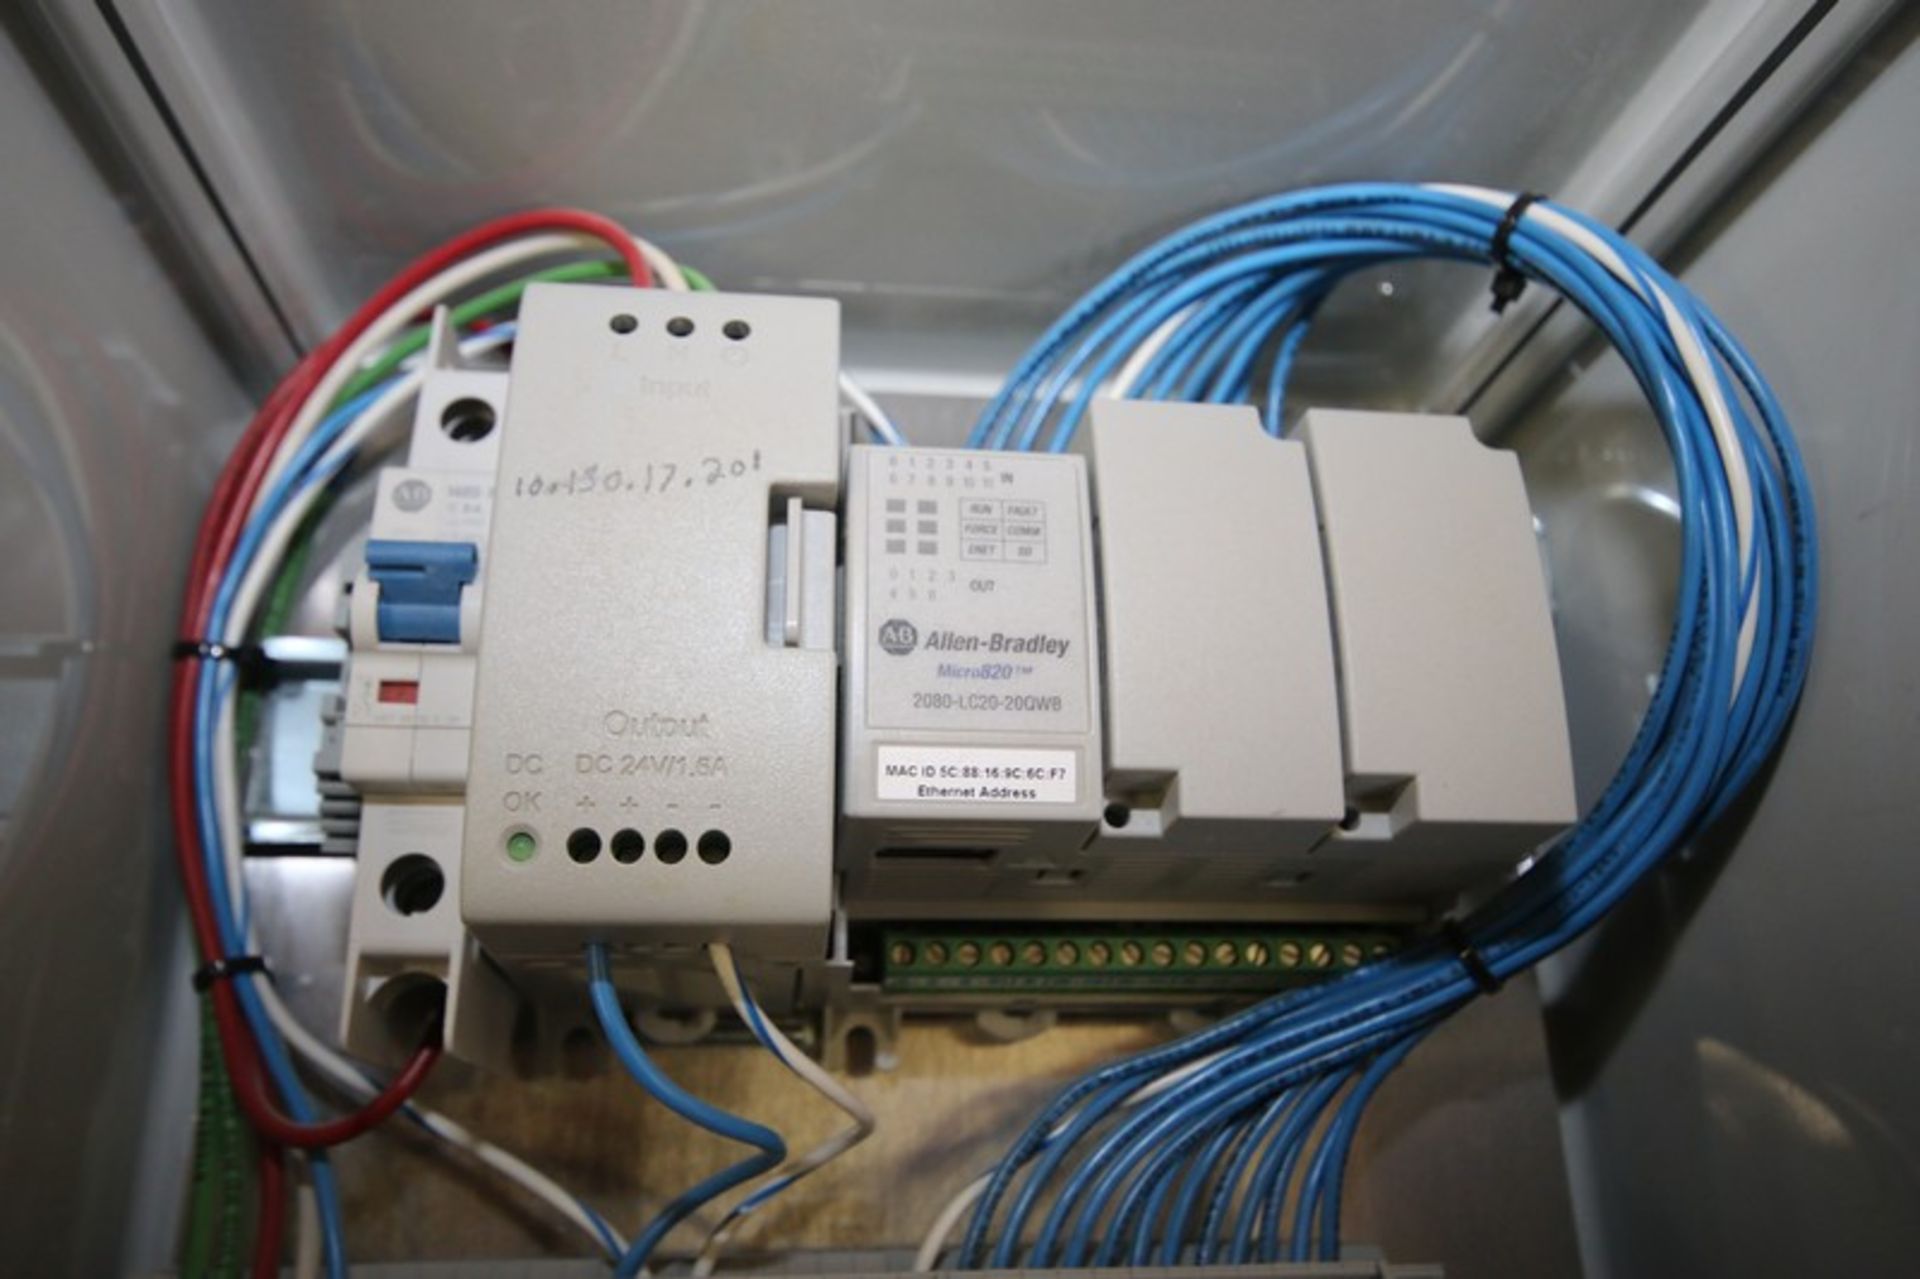 Lot of (2) Allen Bradley Micro 820 PLC Controllers No. 2080-LC20-20QWB, Both Mounted in 10" x 12" - Image 3 of 5